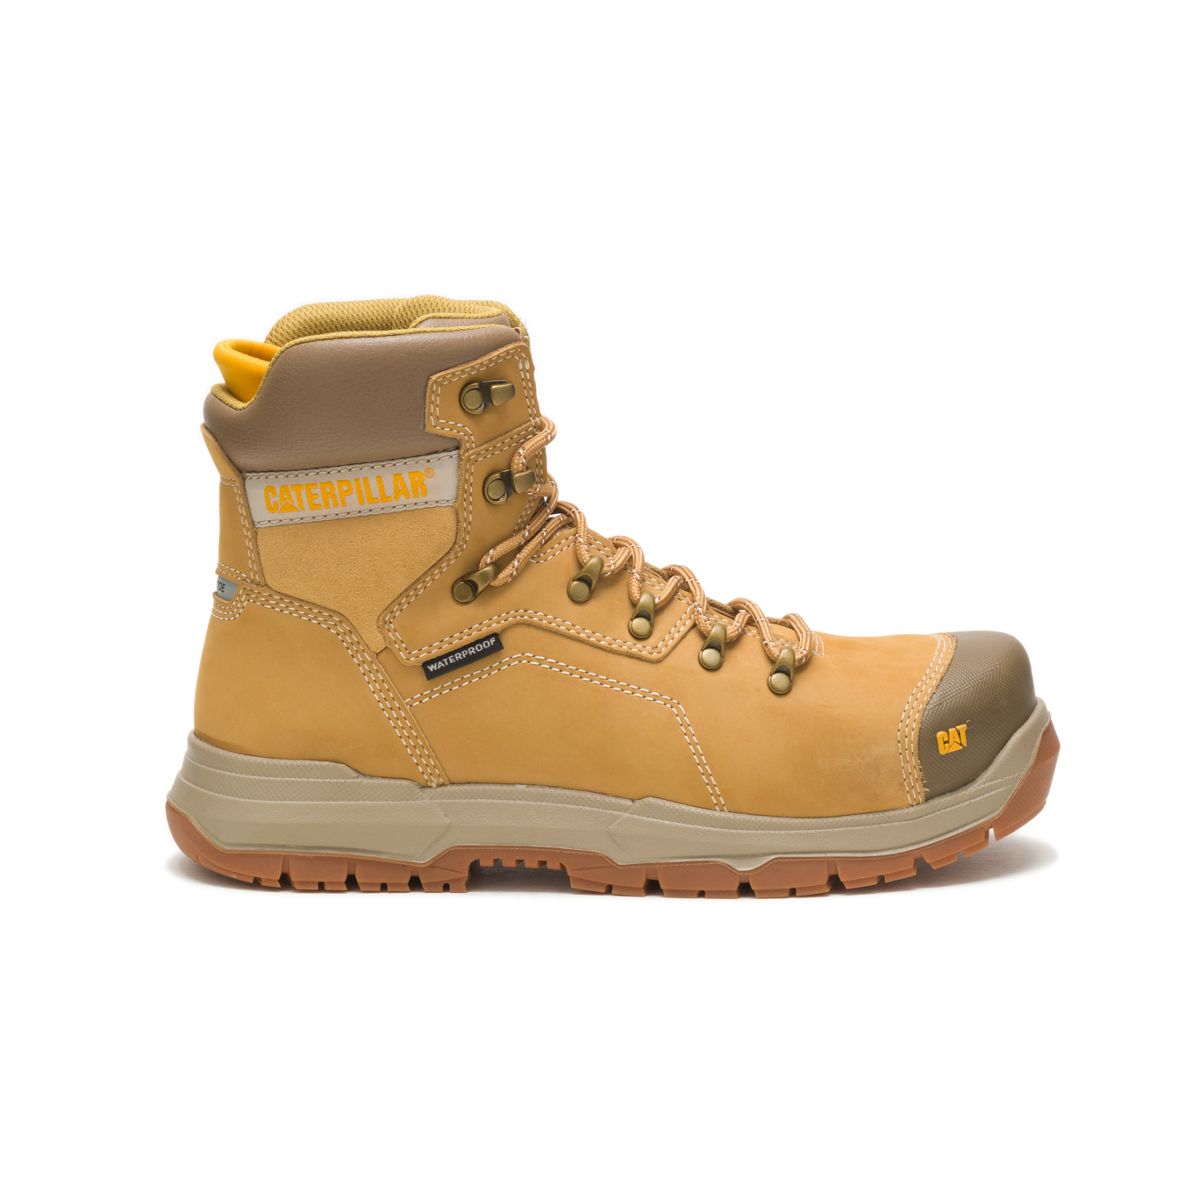 Caterpillar Boots & Shoes On Sale | Official Cat Footwear